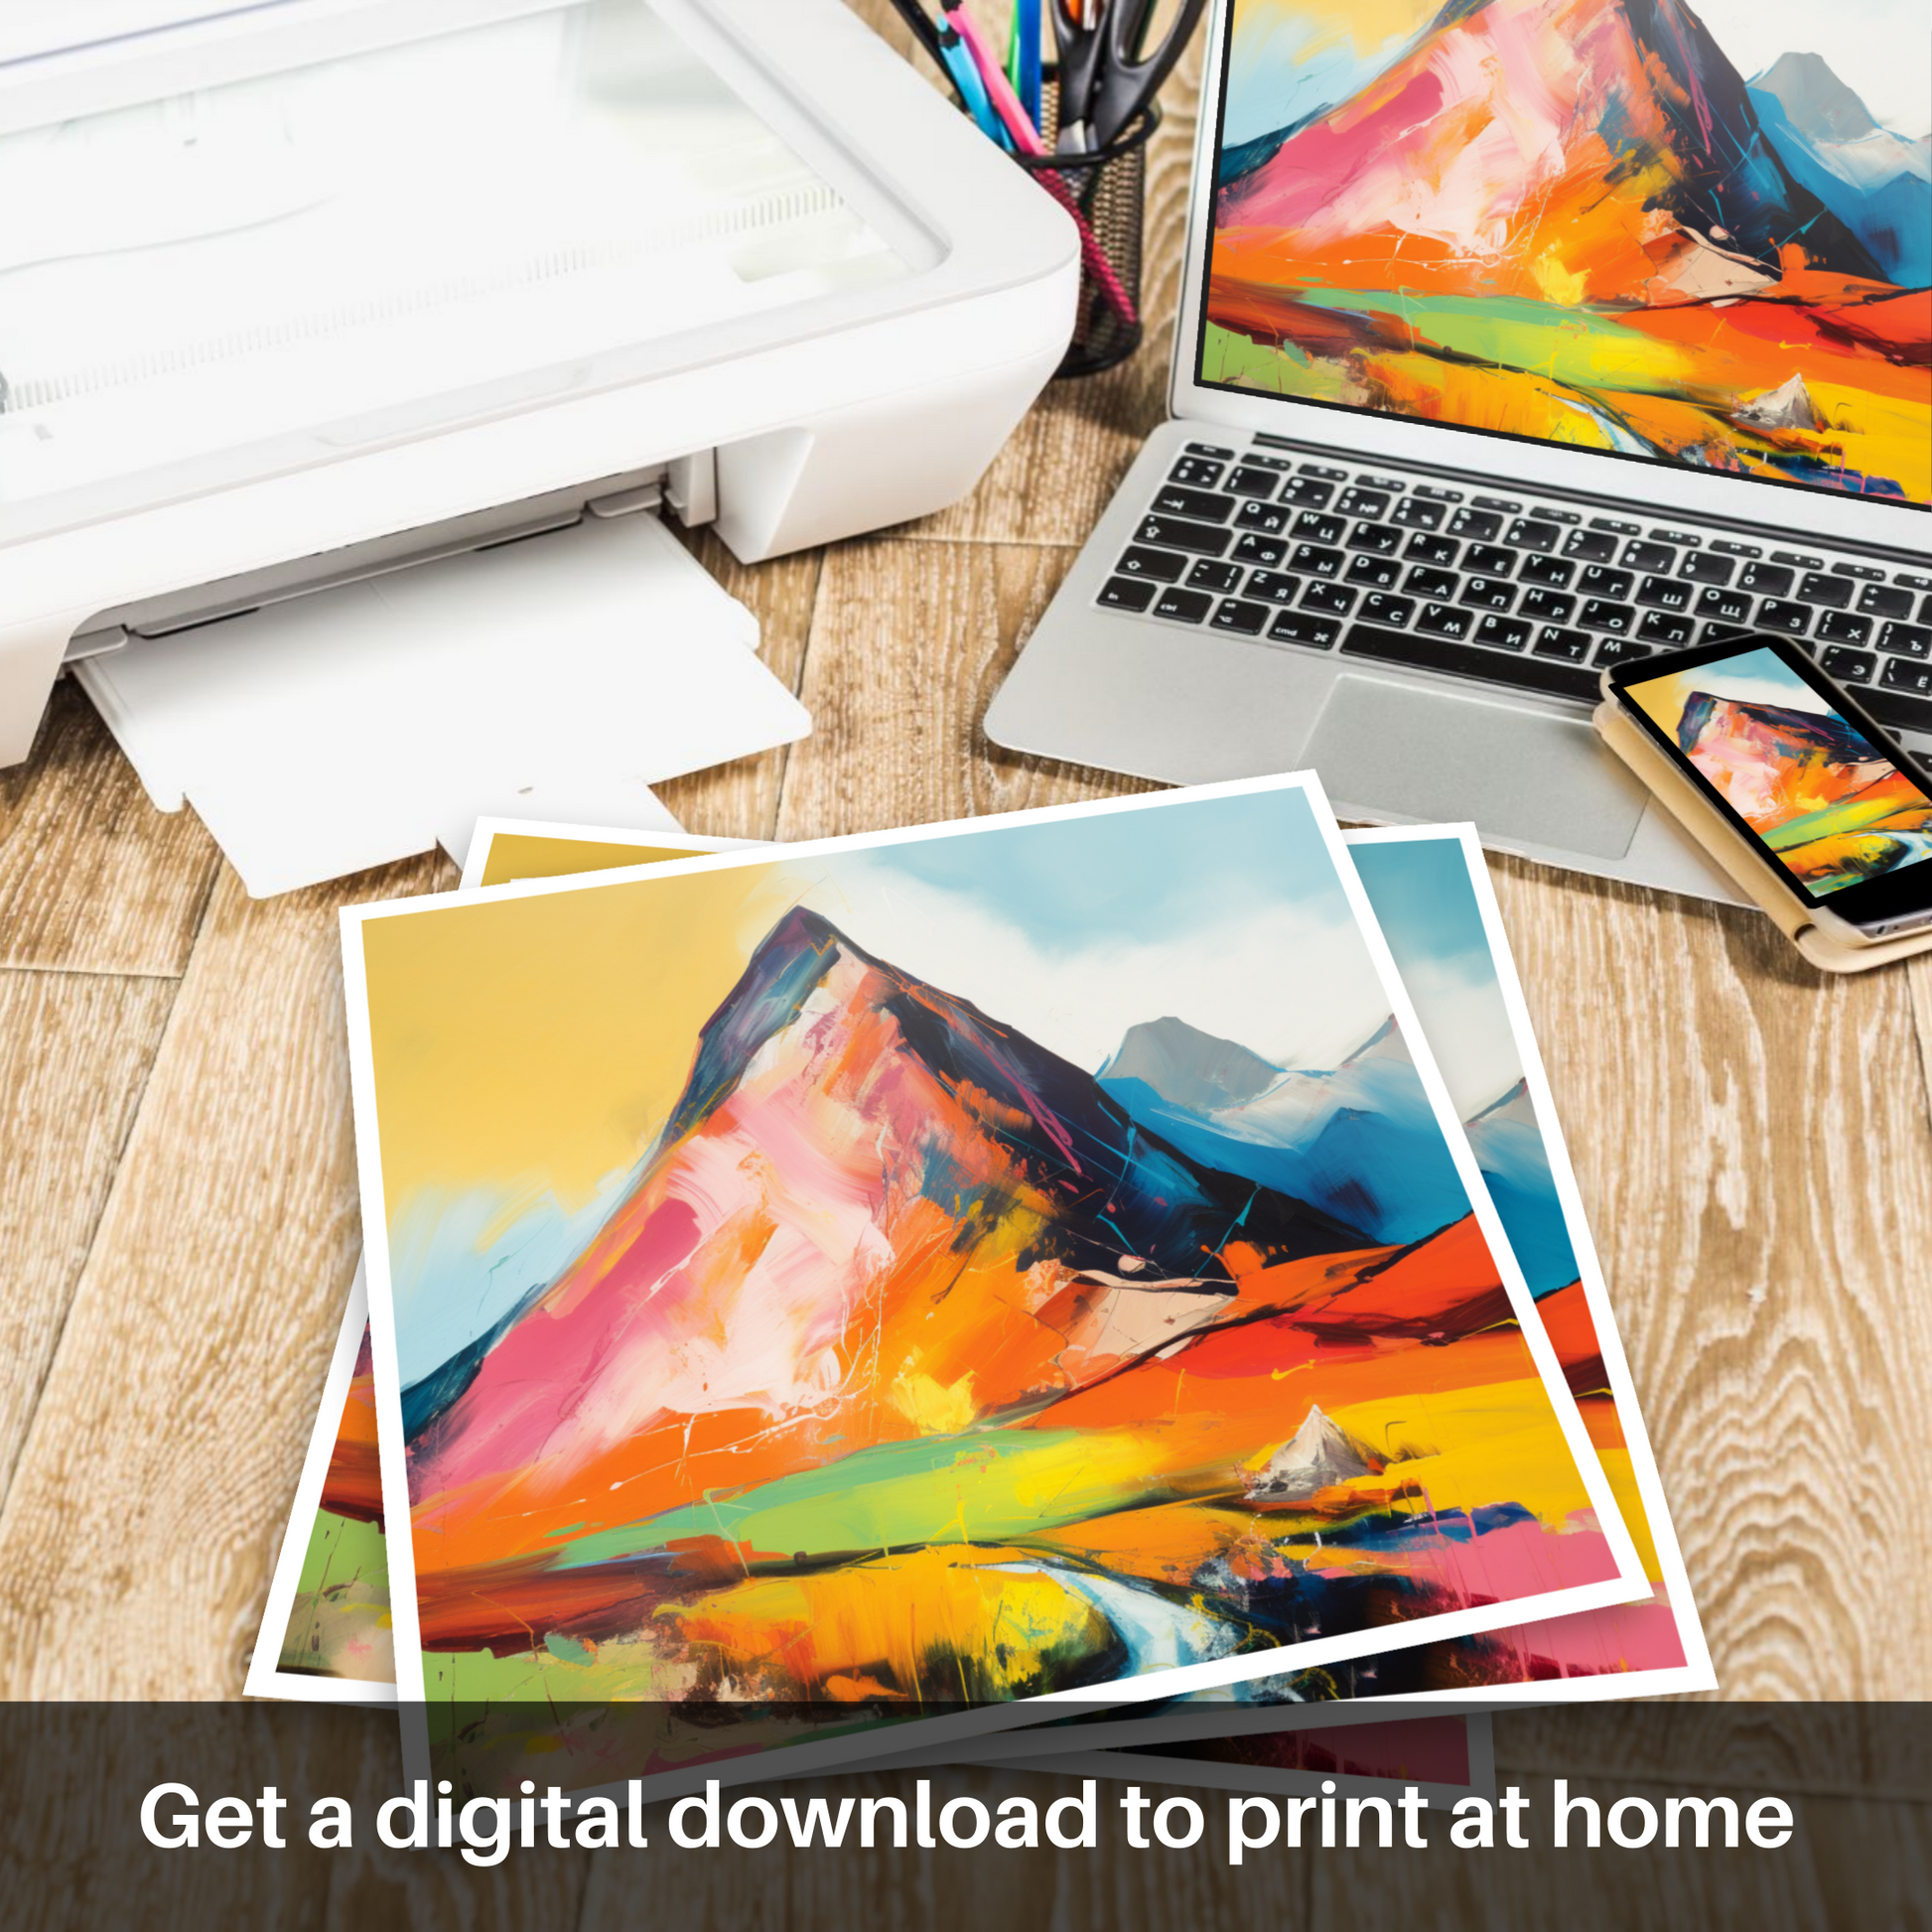 Downloadable and printable picture of Stob Dearg (Buachaille Etive Mòr)